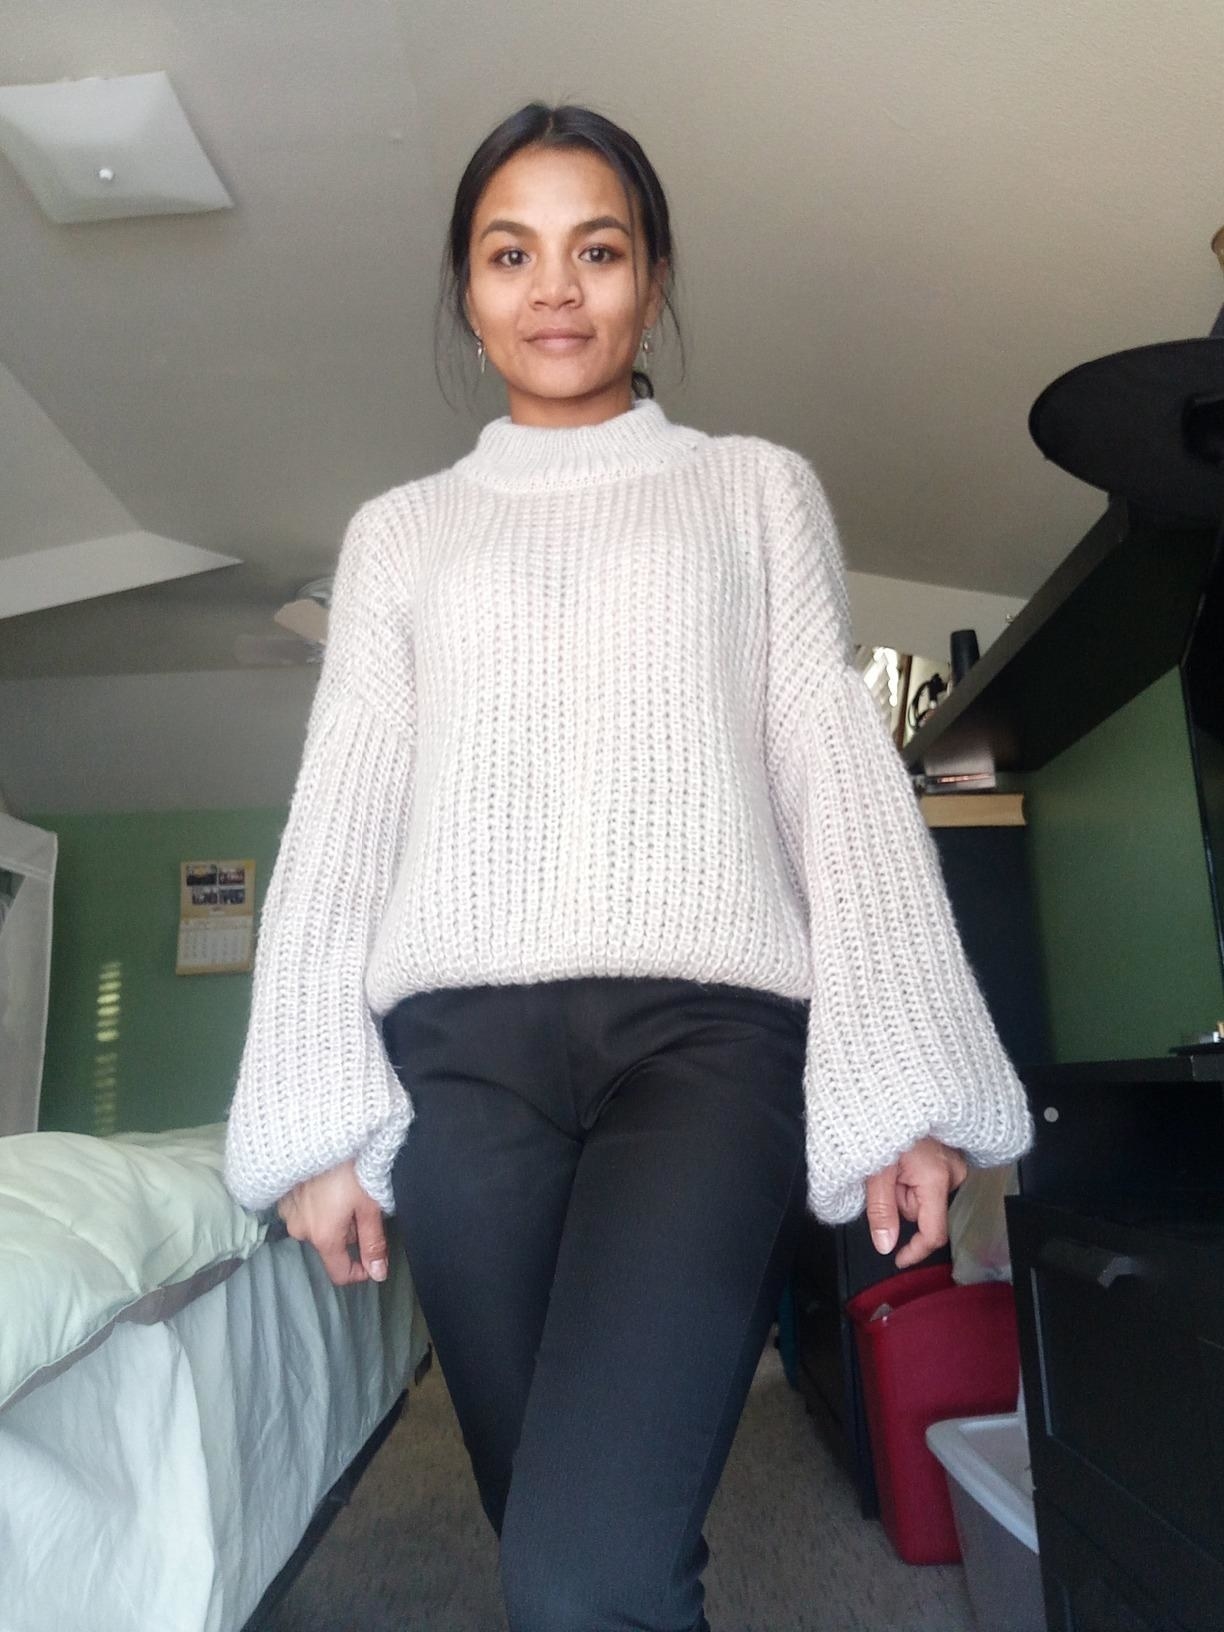 Reviewer wearing gray sweater